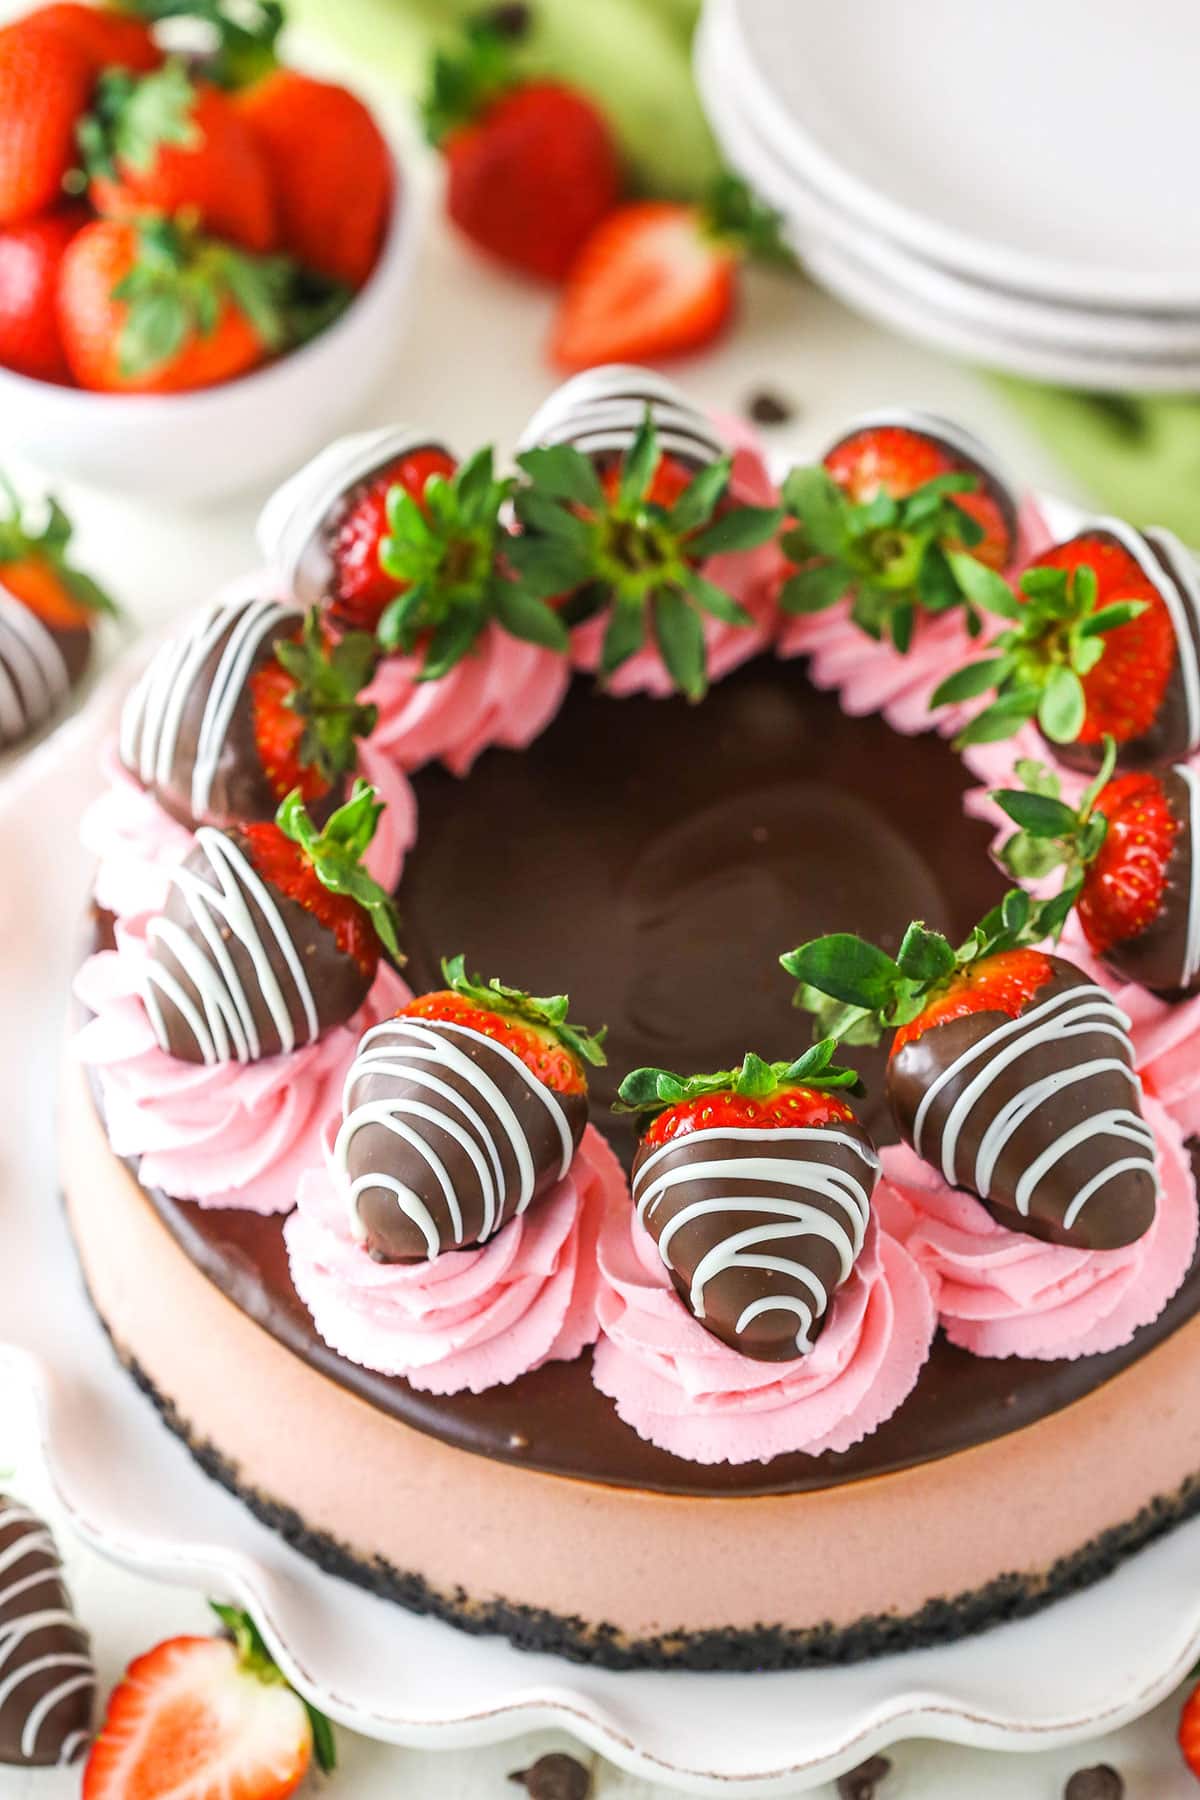 A full Chocolate Covered Strawberry Cheesecake on a white cake stand